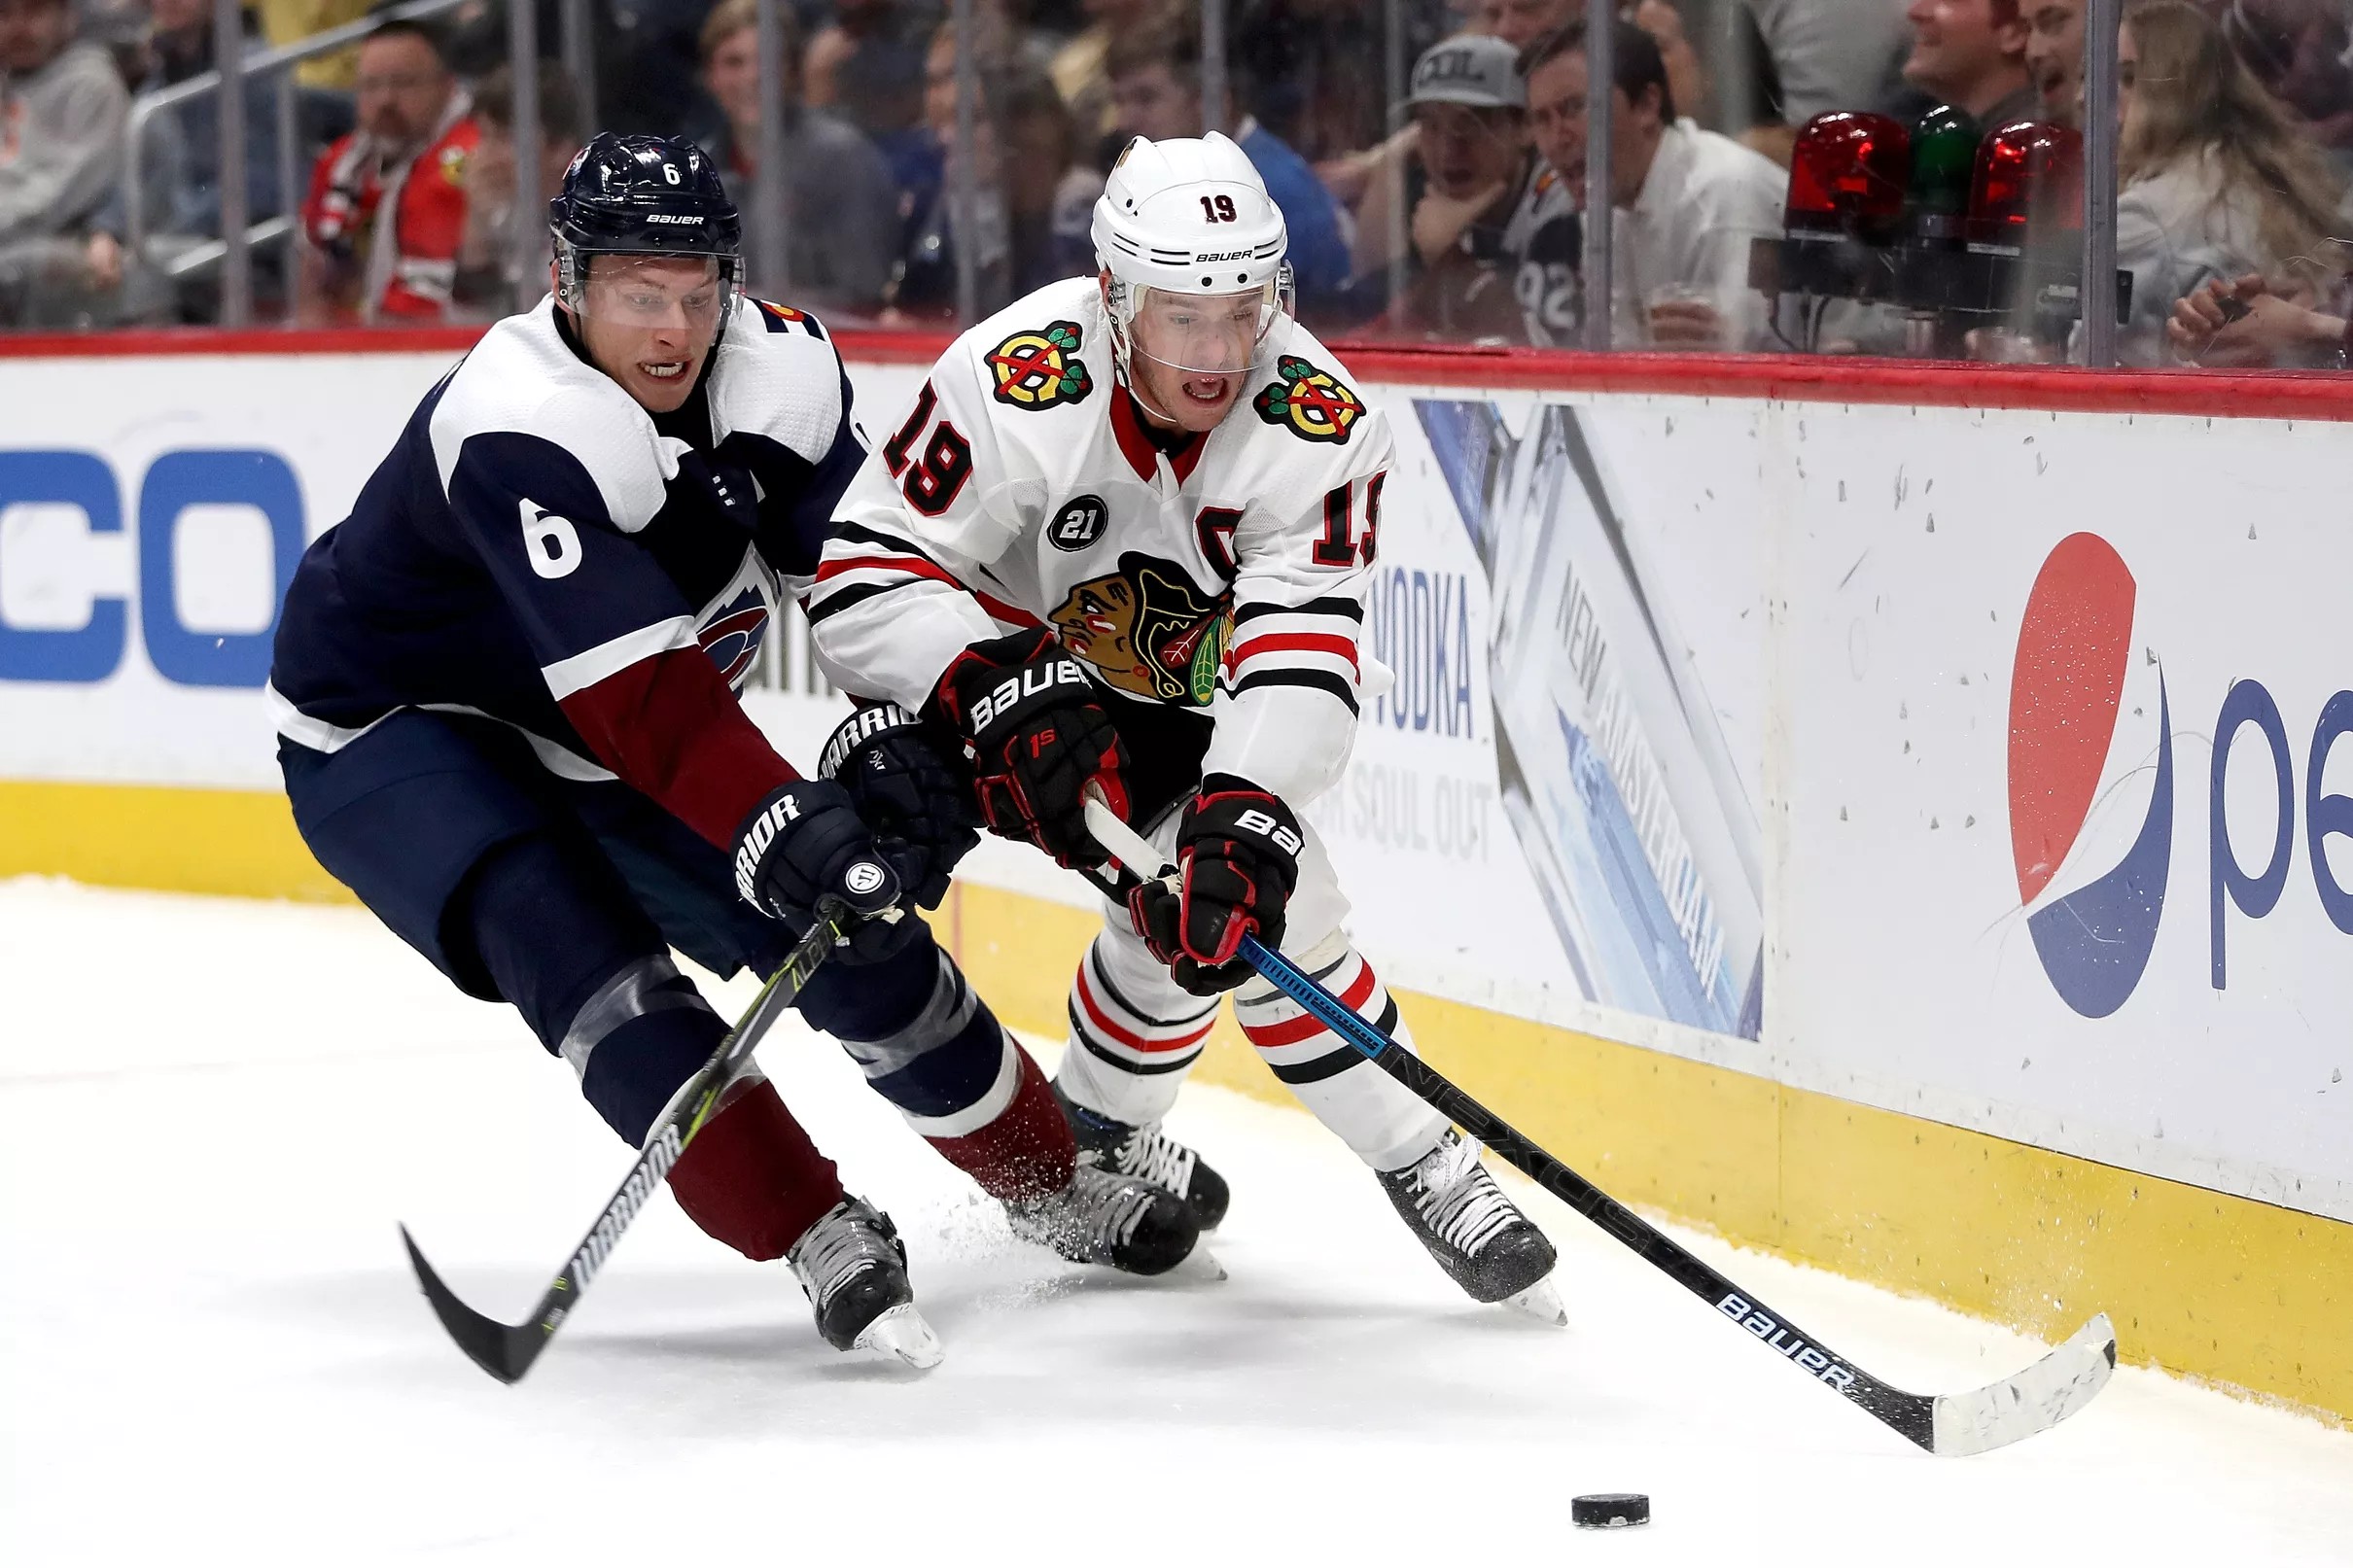 Blackhawks battle Avalanche with valuable points on the line